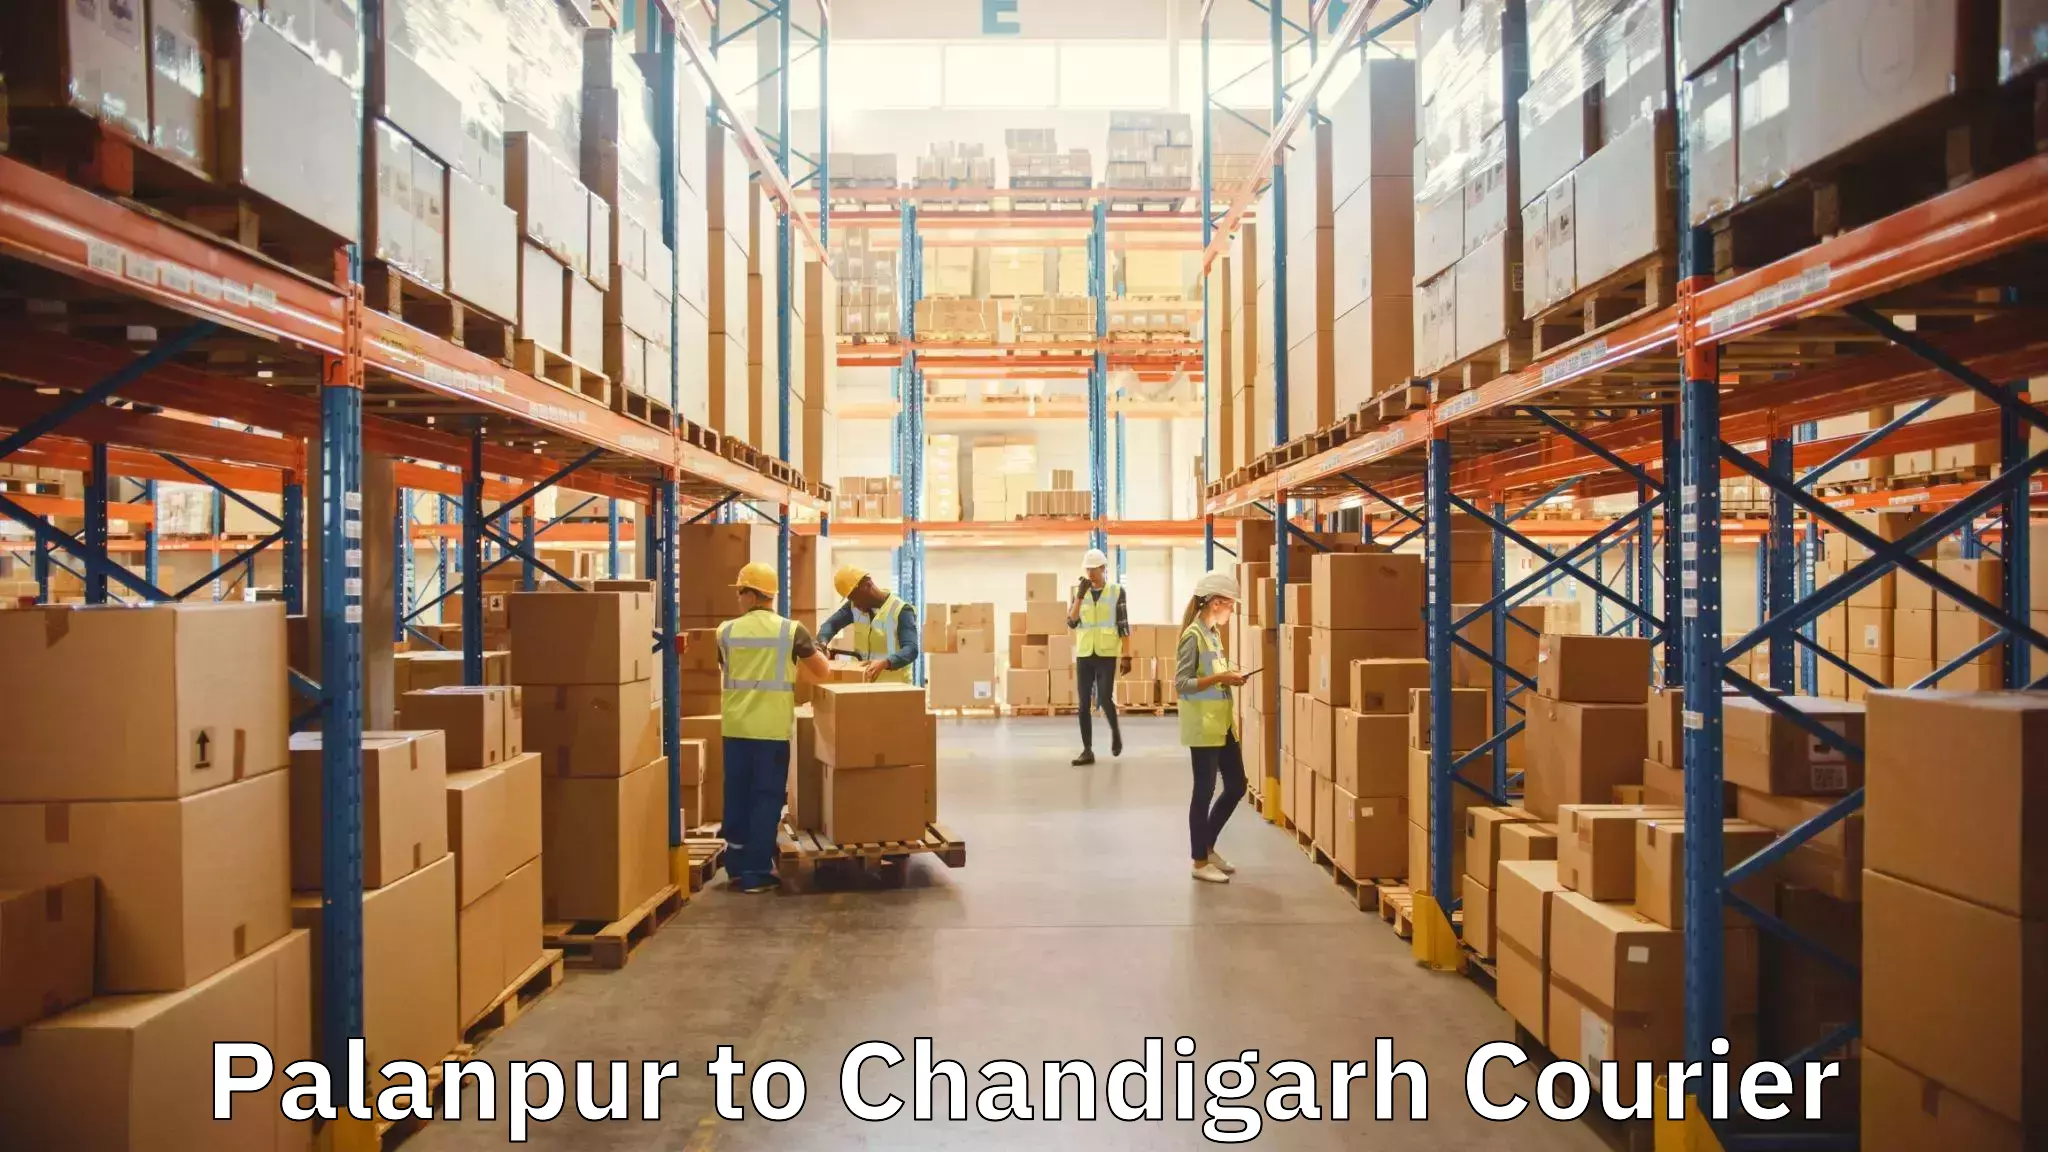 Home moving specialists Palanpur to Chandigarh